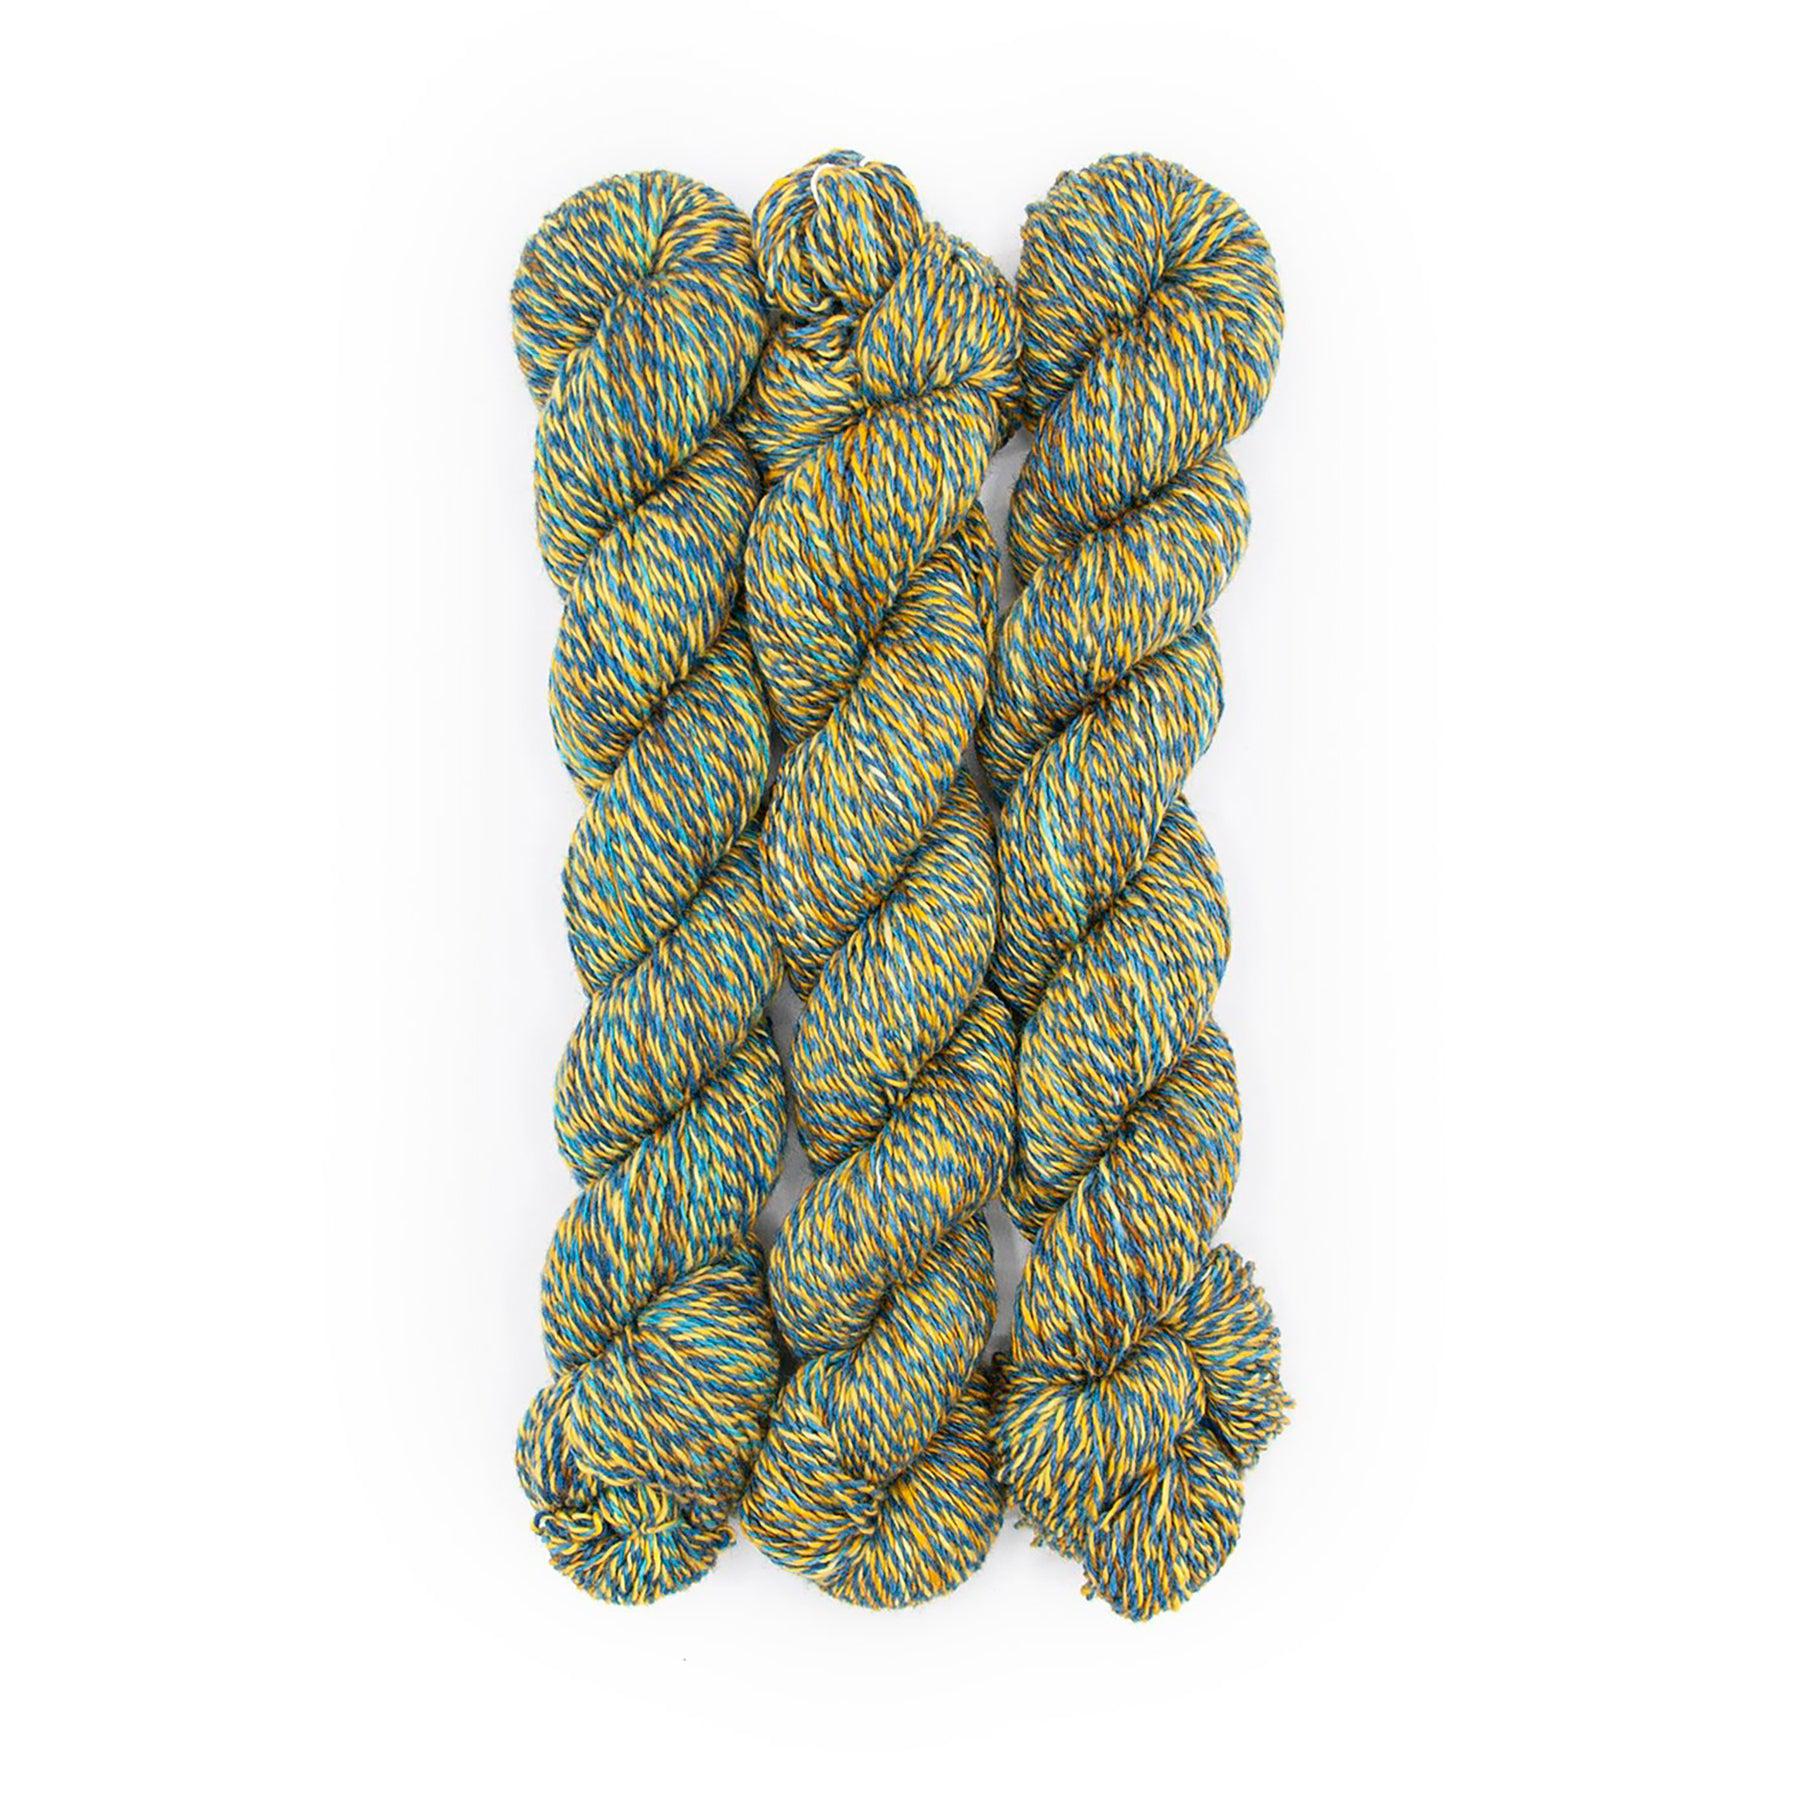 Plied Yarn North Ave Arch Social Club a marled yarn with turquoise, mustard and brown colors.